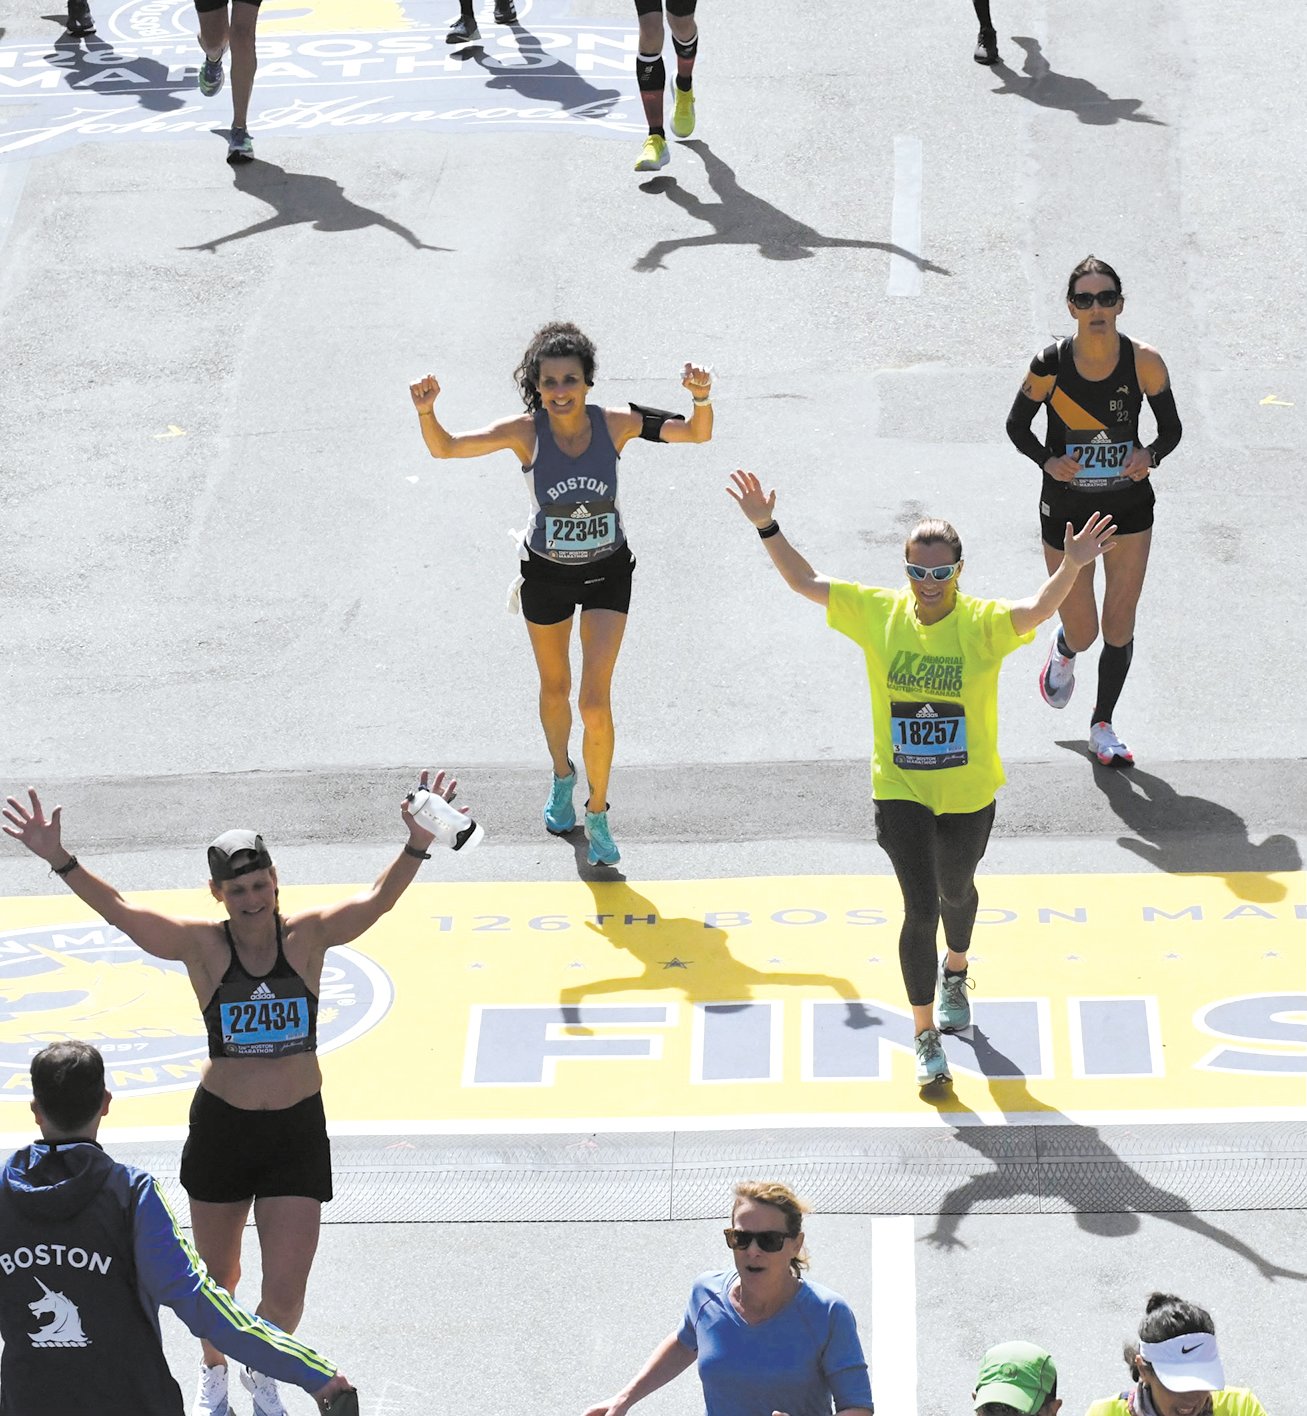 RUNNING BOSTON: Shannon Krasnowiecki as she completed the 2022 Boston Marathon. (Submitted photos)